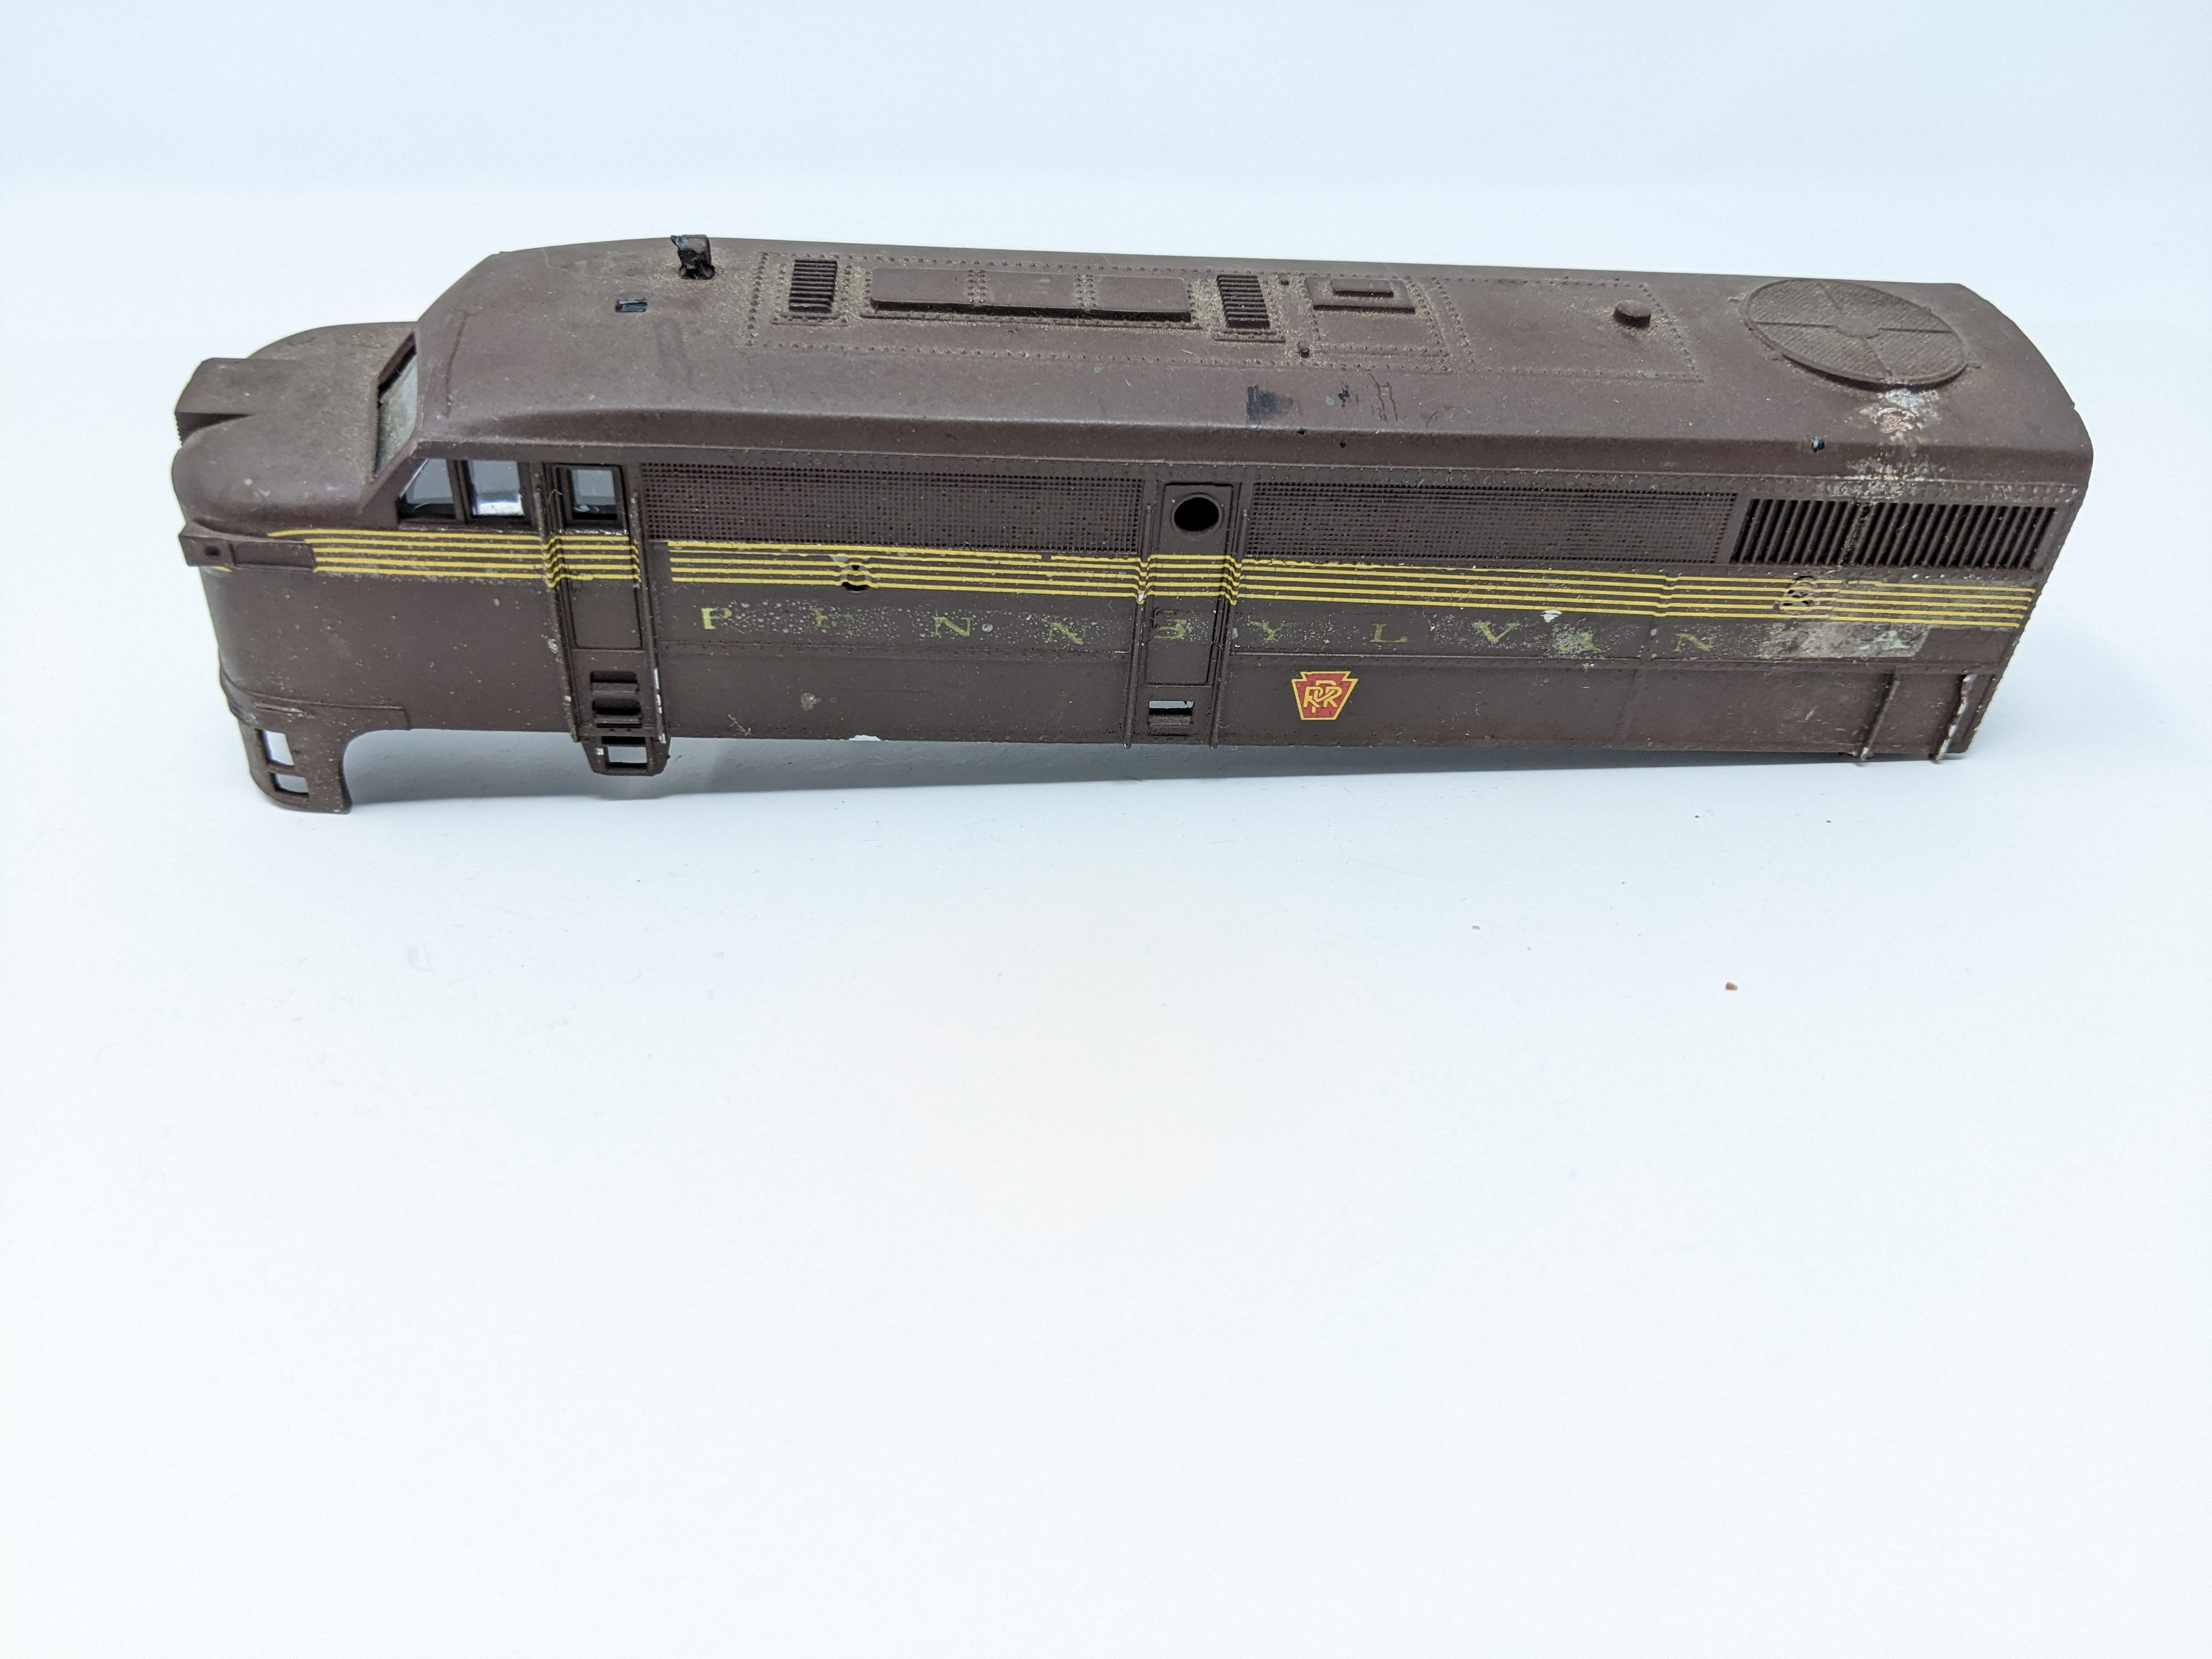 USED Lionel HO Scale, Diesel Locomotive A Unit, Pennsylvania #5750, (For Parts or Repairs) (DC)